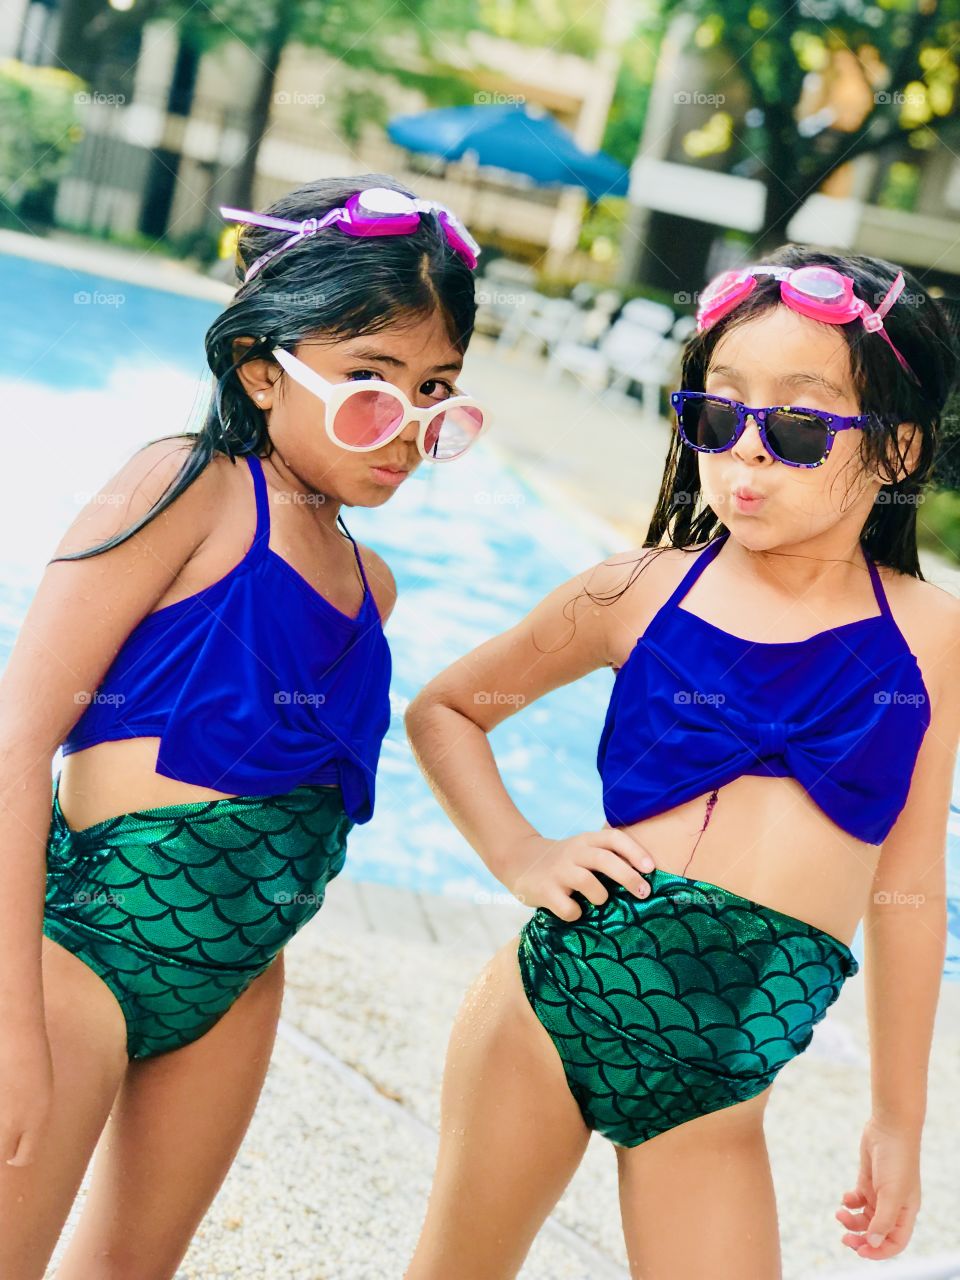 Daughters being sassy at the pool this summer